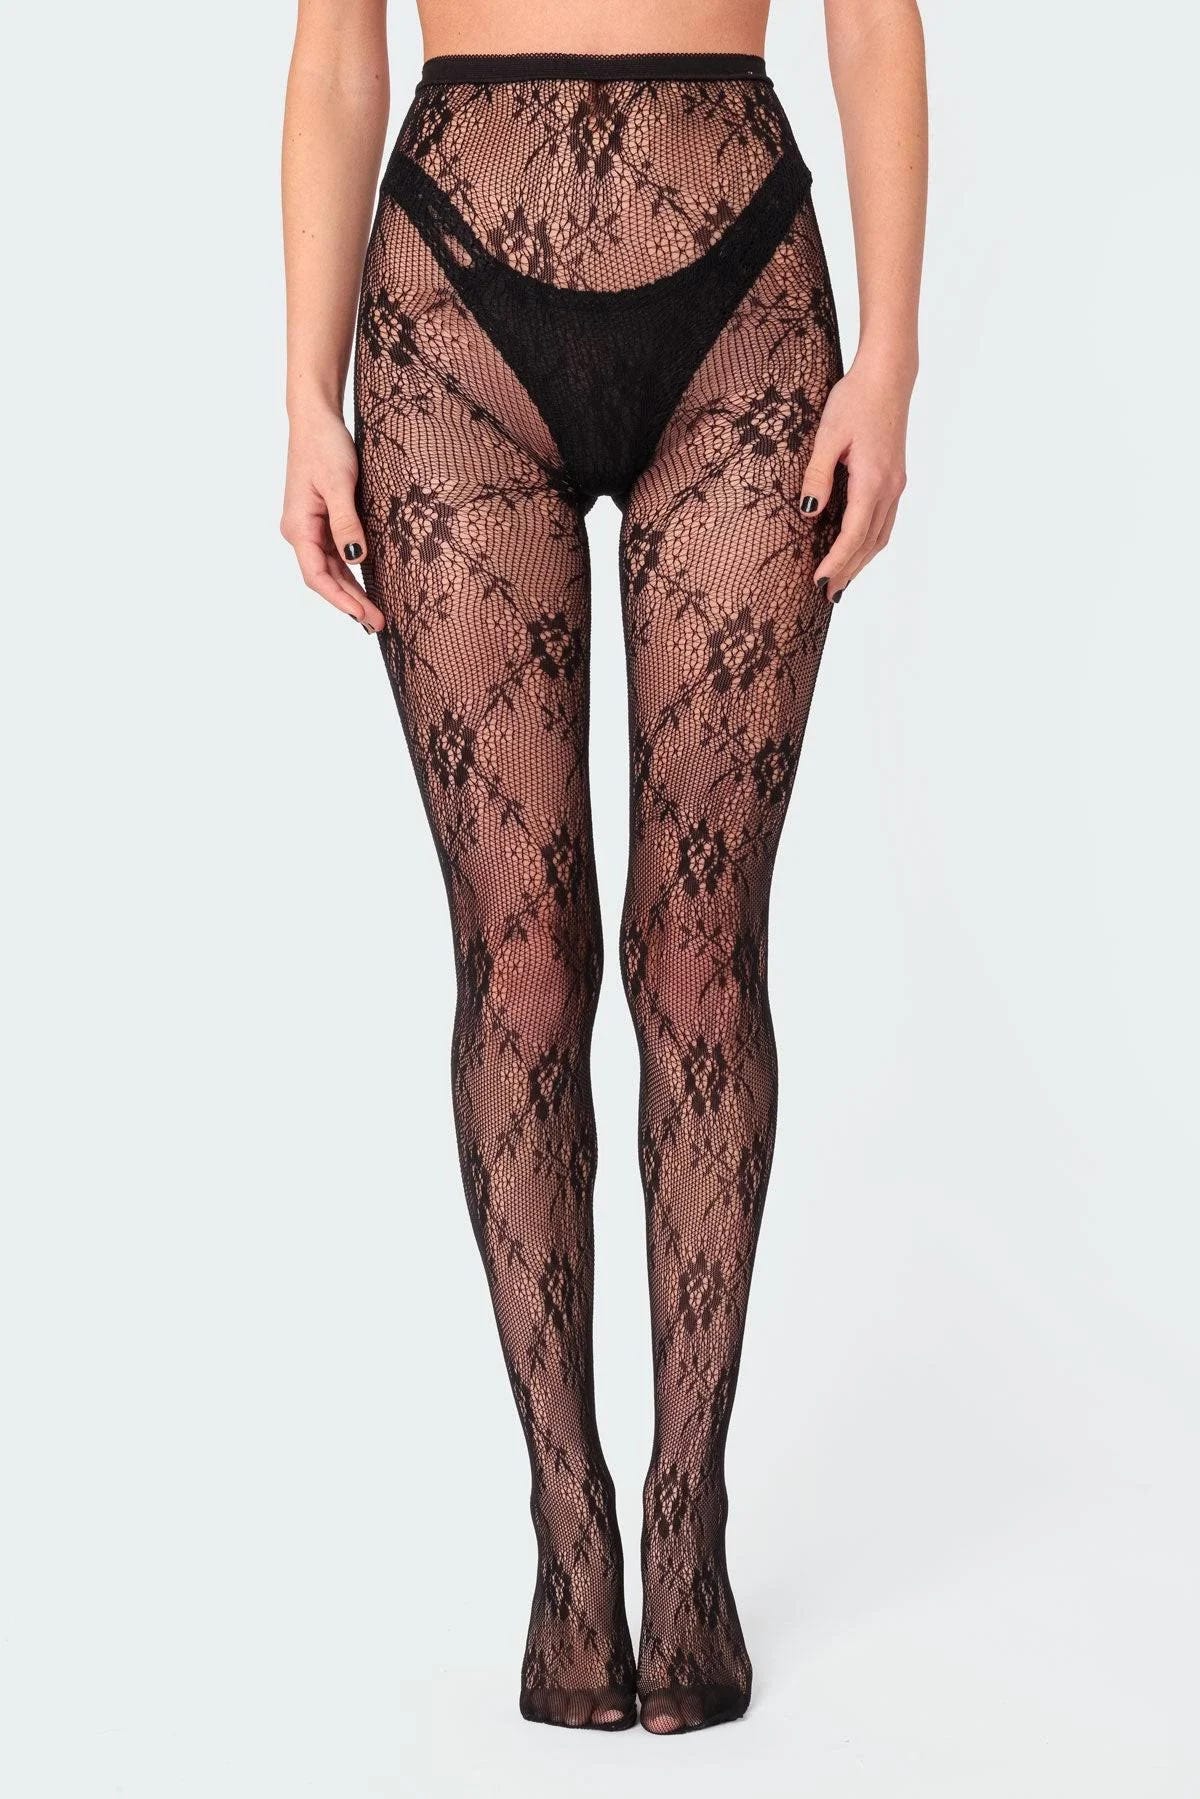 Sheer Lace Tights: Stylish and Comfortable | Image